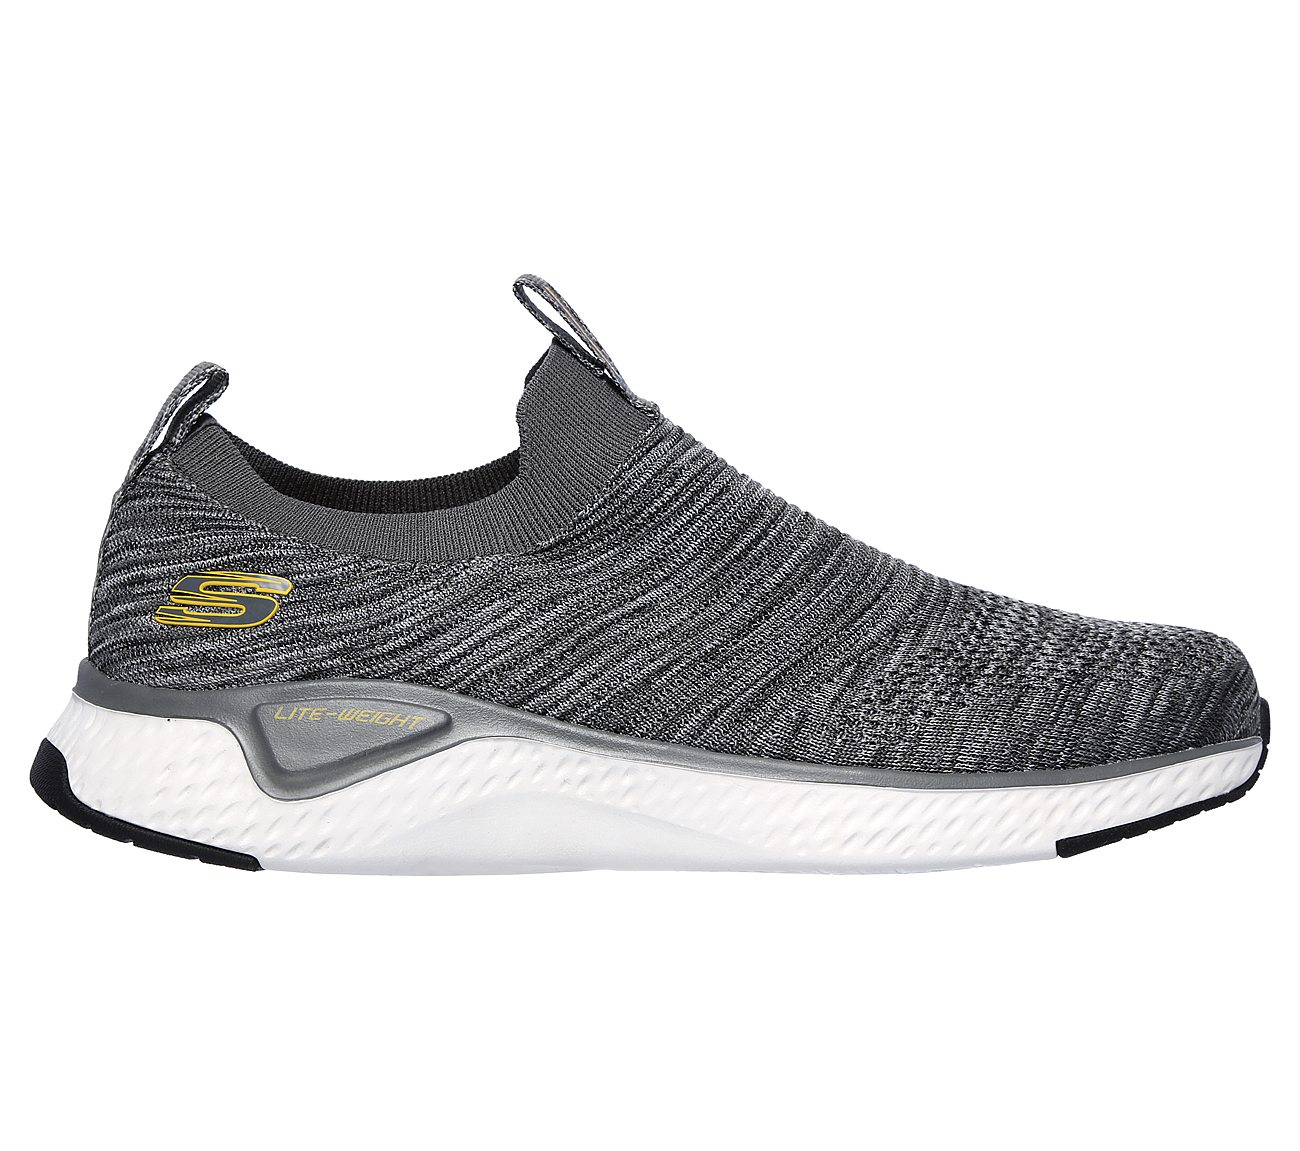 SOLAR FUSE, CHARCOAL/GREY Footwear Right View